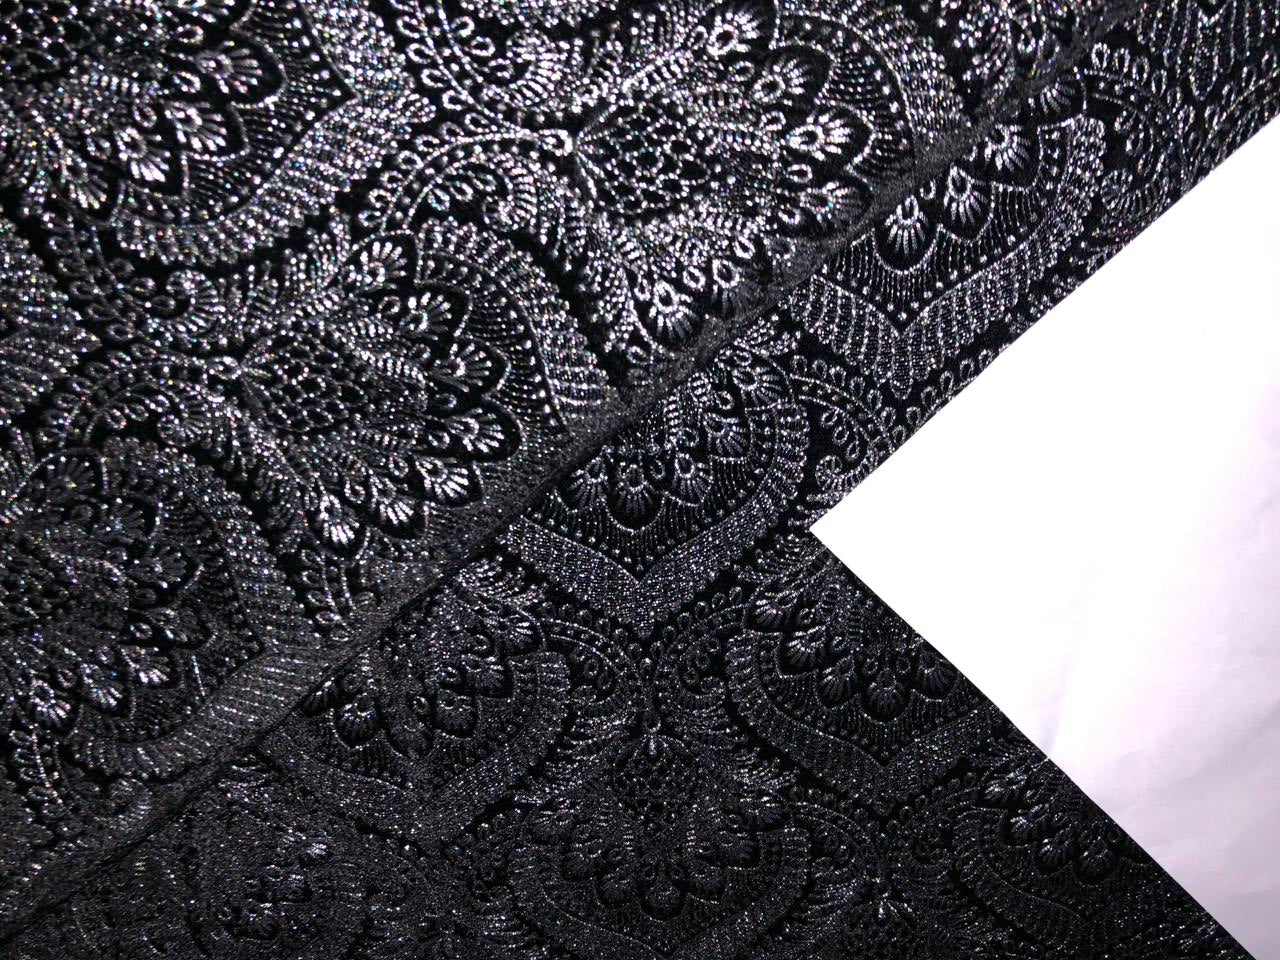 Brocade Velvet Embroidered fabric black color 44" wide 5 DESIGNS BRO866[4] BLACK AND SILVER BRO866[3] BLACK AND GOLD BRO936[1] BLACK AND SUBTLE GOLD JACQUARD BRO936[2] BLACK AND SUBTLE SILVER JACQUARD BRO936[3] JET BLACK JACQUARD